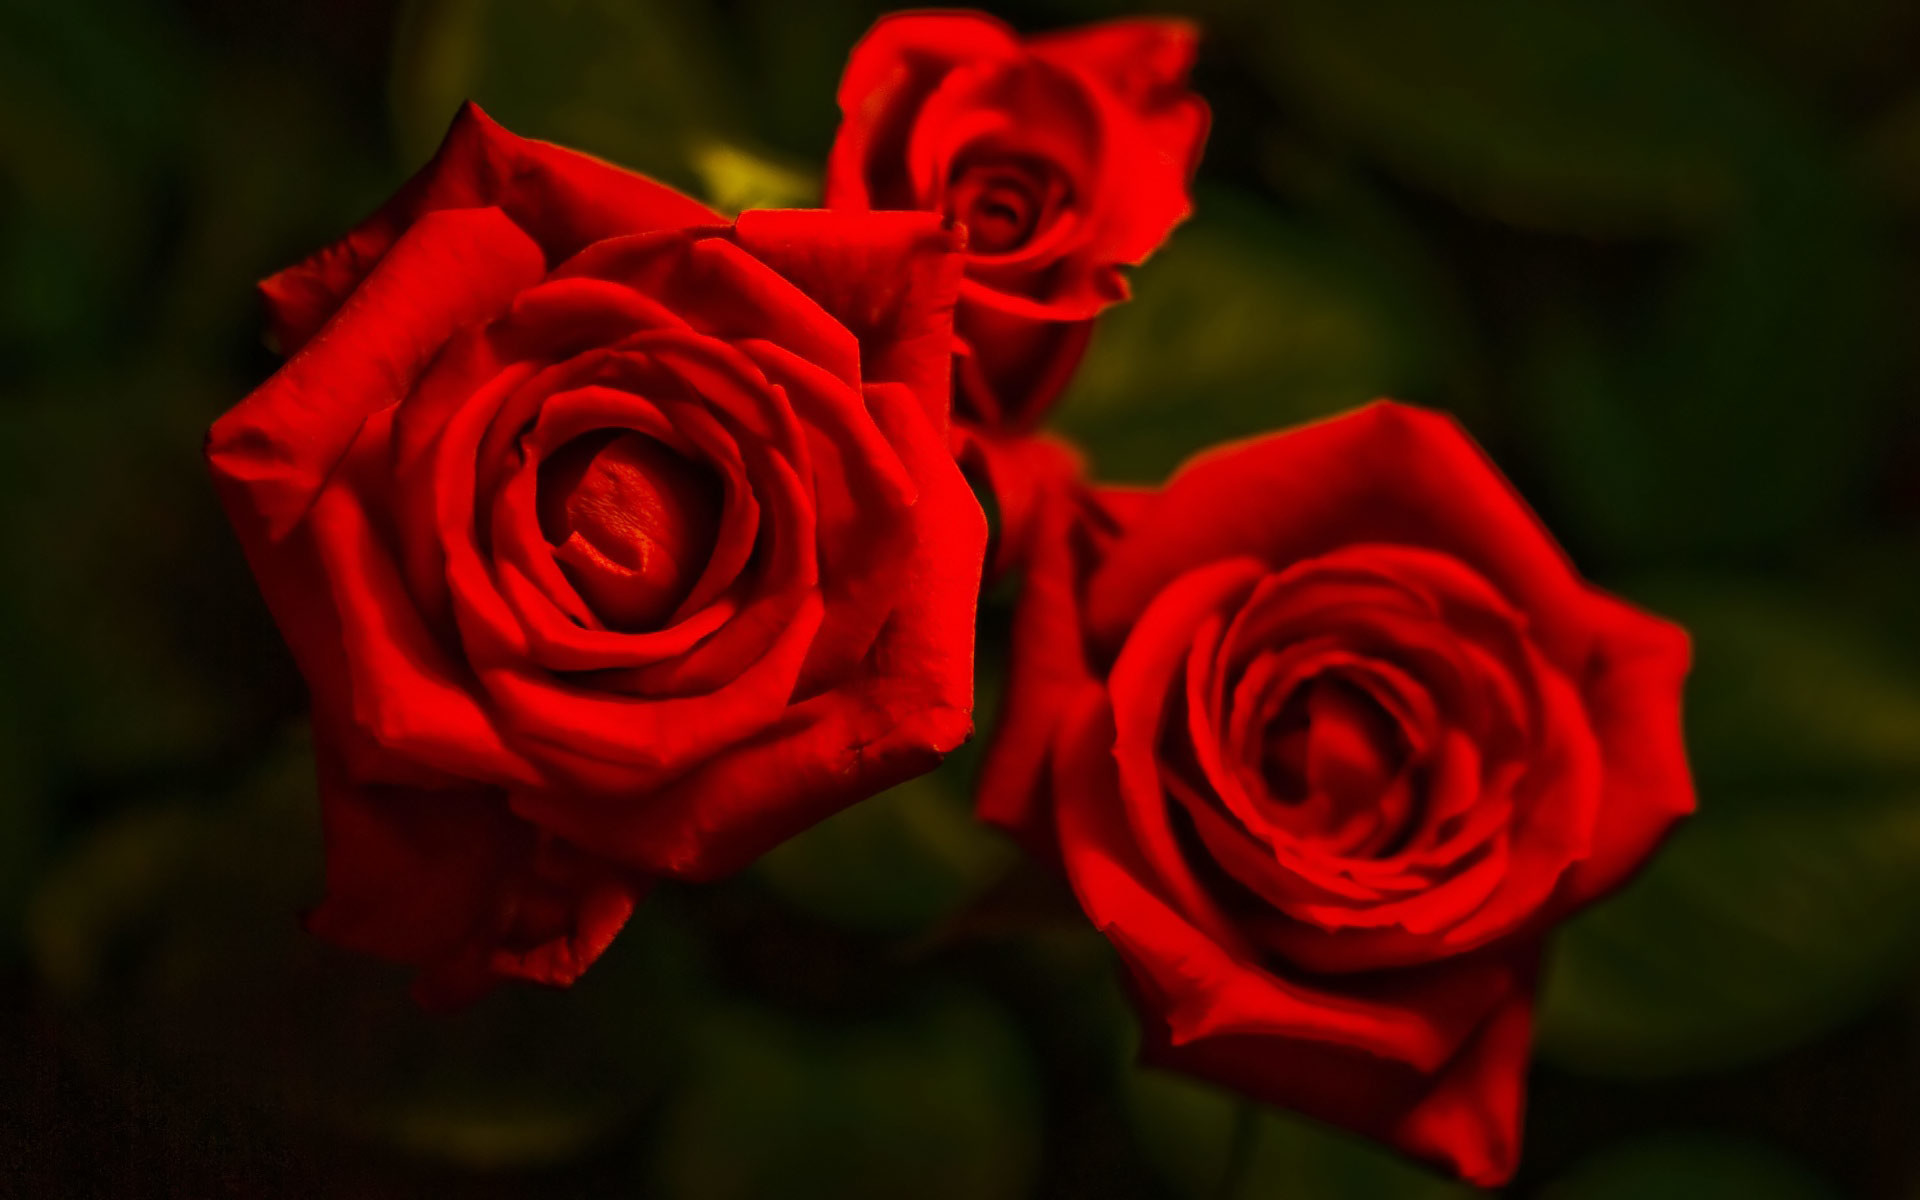 1920x1200, Px Red Rose Widescreen Image Most Beautiful - Most Beautiful Red Roses - HD Wallpaper 